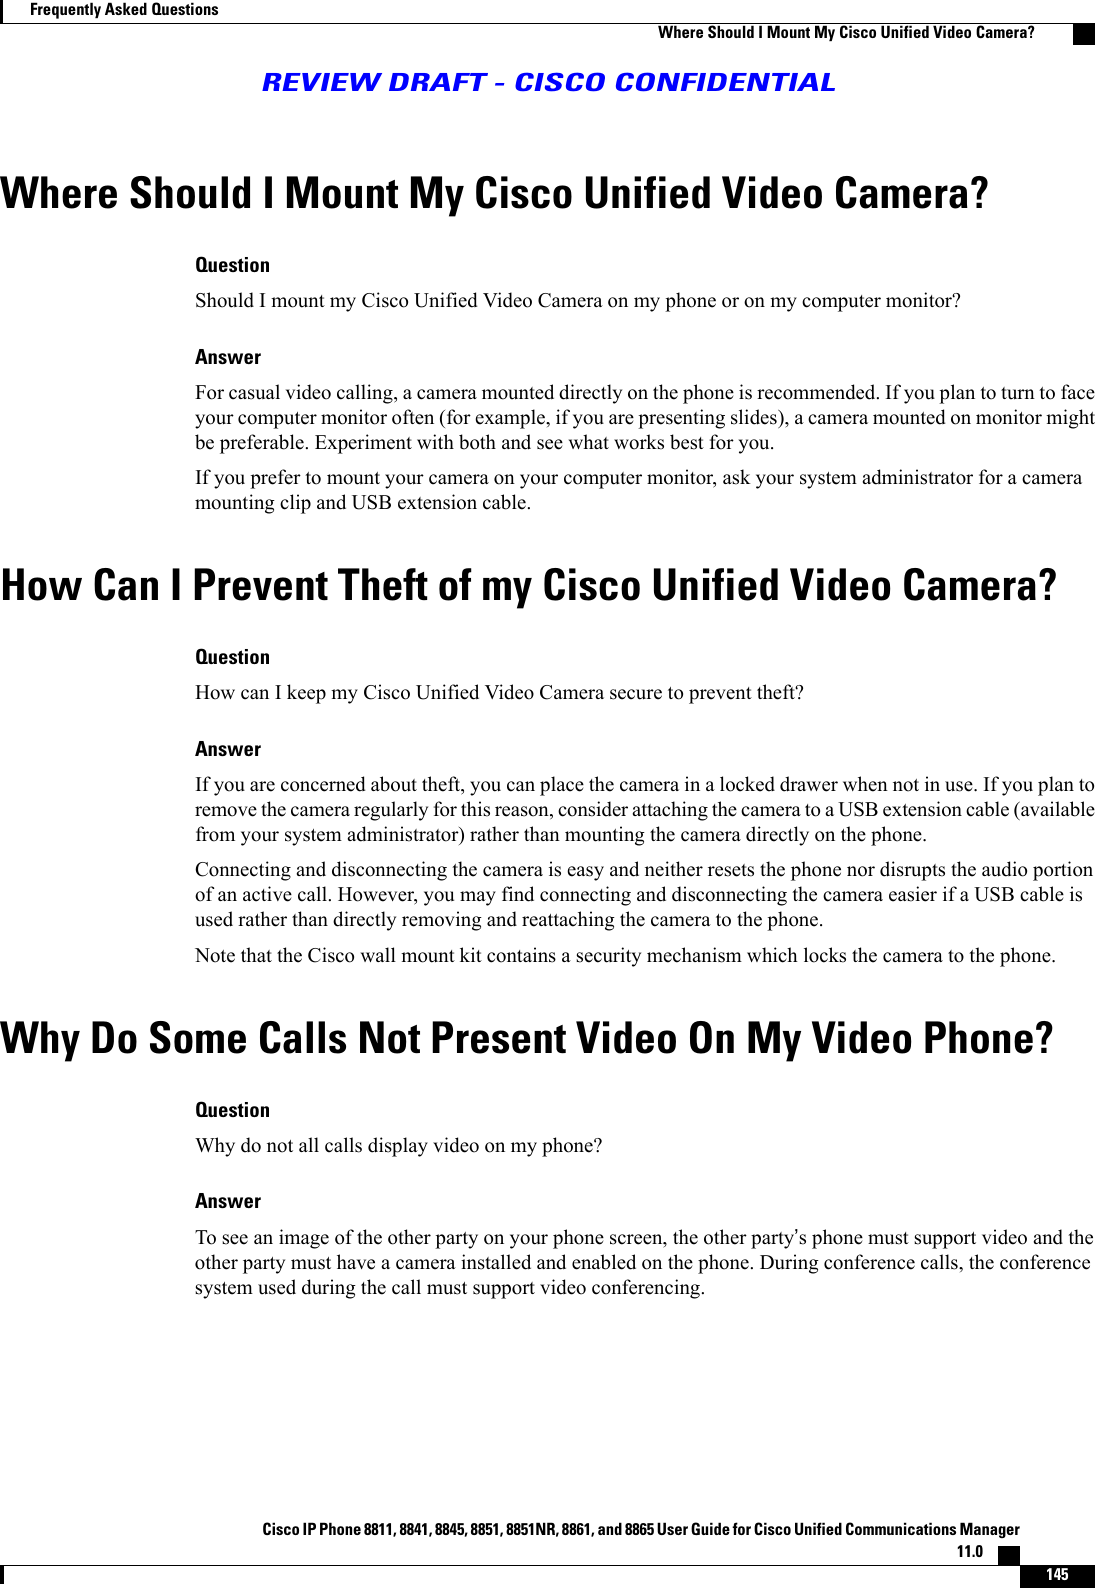 Where Should I Mount My Cisco Unified Video Camera?QuestionShould I mount my Cisco Unified Video Camera on my phone or on my computer monitor?AnswerFor casual video calling, a camera mounted directly on the phone is recommended. If you plan to turn to faceyour computer monitor often (for example, if you are presenting slides), a camera mounted on monitor mightbe preferable. Experiment with both and see what works best for you.If you prefer to mount your camera on your computer monitor, ask your system administrator for a cameramounting clip and USB extension cable.How Can I Prevent Theft of my Cisco Unified Video Camera?QuestionHow can I keep my Cisco Unified Video Camera secure to prevent theft?AnswerIf you are concerned about theft, you can place the camera in a locked drawer when not in use. If you plan toremove the camera regularly for this reason, consider attaching the camera to a USB extension cable (availablefrom your system administrator) rather than mounting the camera directly on the phone.Connecting and disconnecting the camera is easy and neither resets the phone nor disrupts the audio portionof an active call. However, you may find connecting and disconnecting the camera easier if a USB cable isused rather than directly removing and reattaching the camera to the phone.Note that the Cisco wall mount kit contains a security mechanism which locks the camera to the phone.Why Do Some Calls Not Present Video On My Video Phone?QuestionWhy do not all calls display video on my phone?AnswerTo see an image of the other party on your phone screen, the other party’s phone must support video and theother party must have a camera installed and enabled on the phone. During conference calls, the conferencesystem used during the call must support video conferencing.Cisco IP Phone 8811, 8841, 8845, 8851, 8851NR, 8861, and 8865 User Guide for Cisco Unified Communications Manager11.0    145Frequently Asked QuestionsWhere Should I Mount My Cisco Unified Video Camera?REVIEW DRAFT - CISCO CONFIDENTIAL